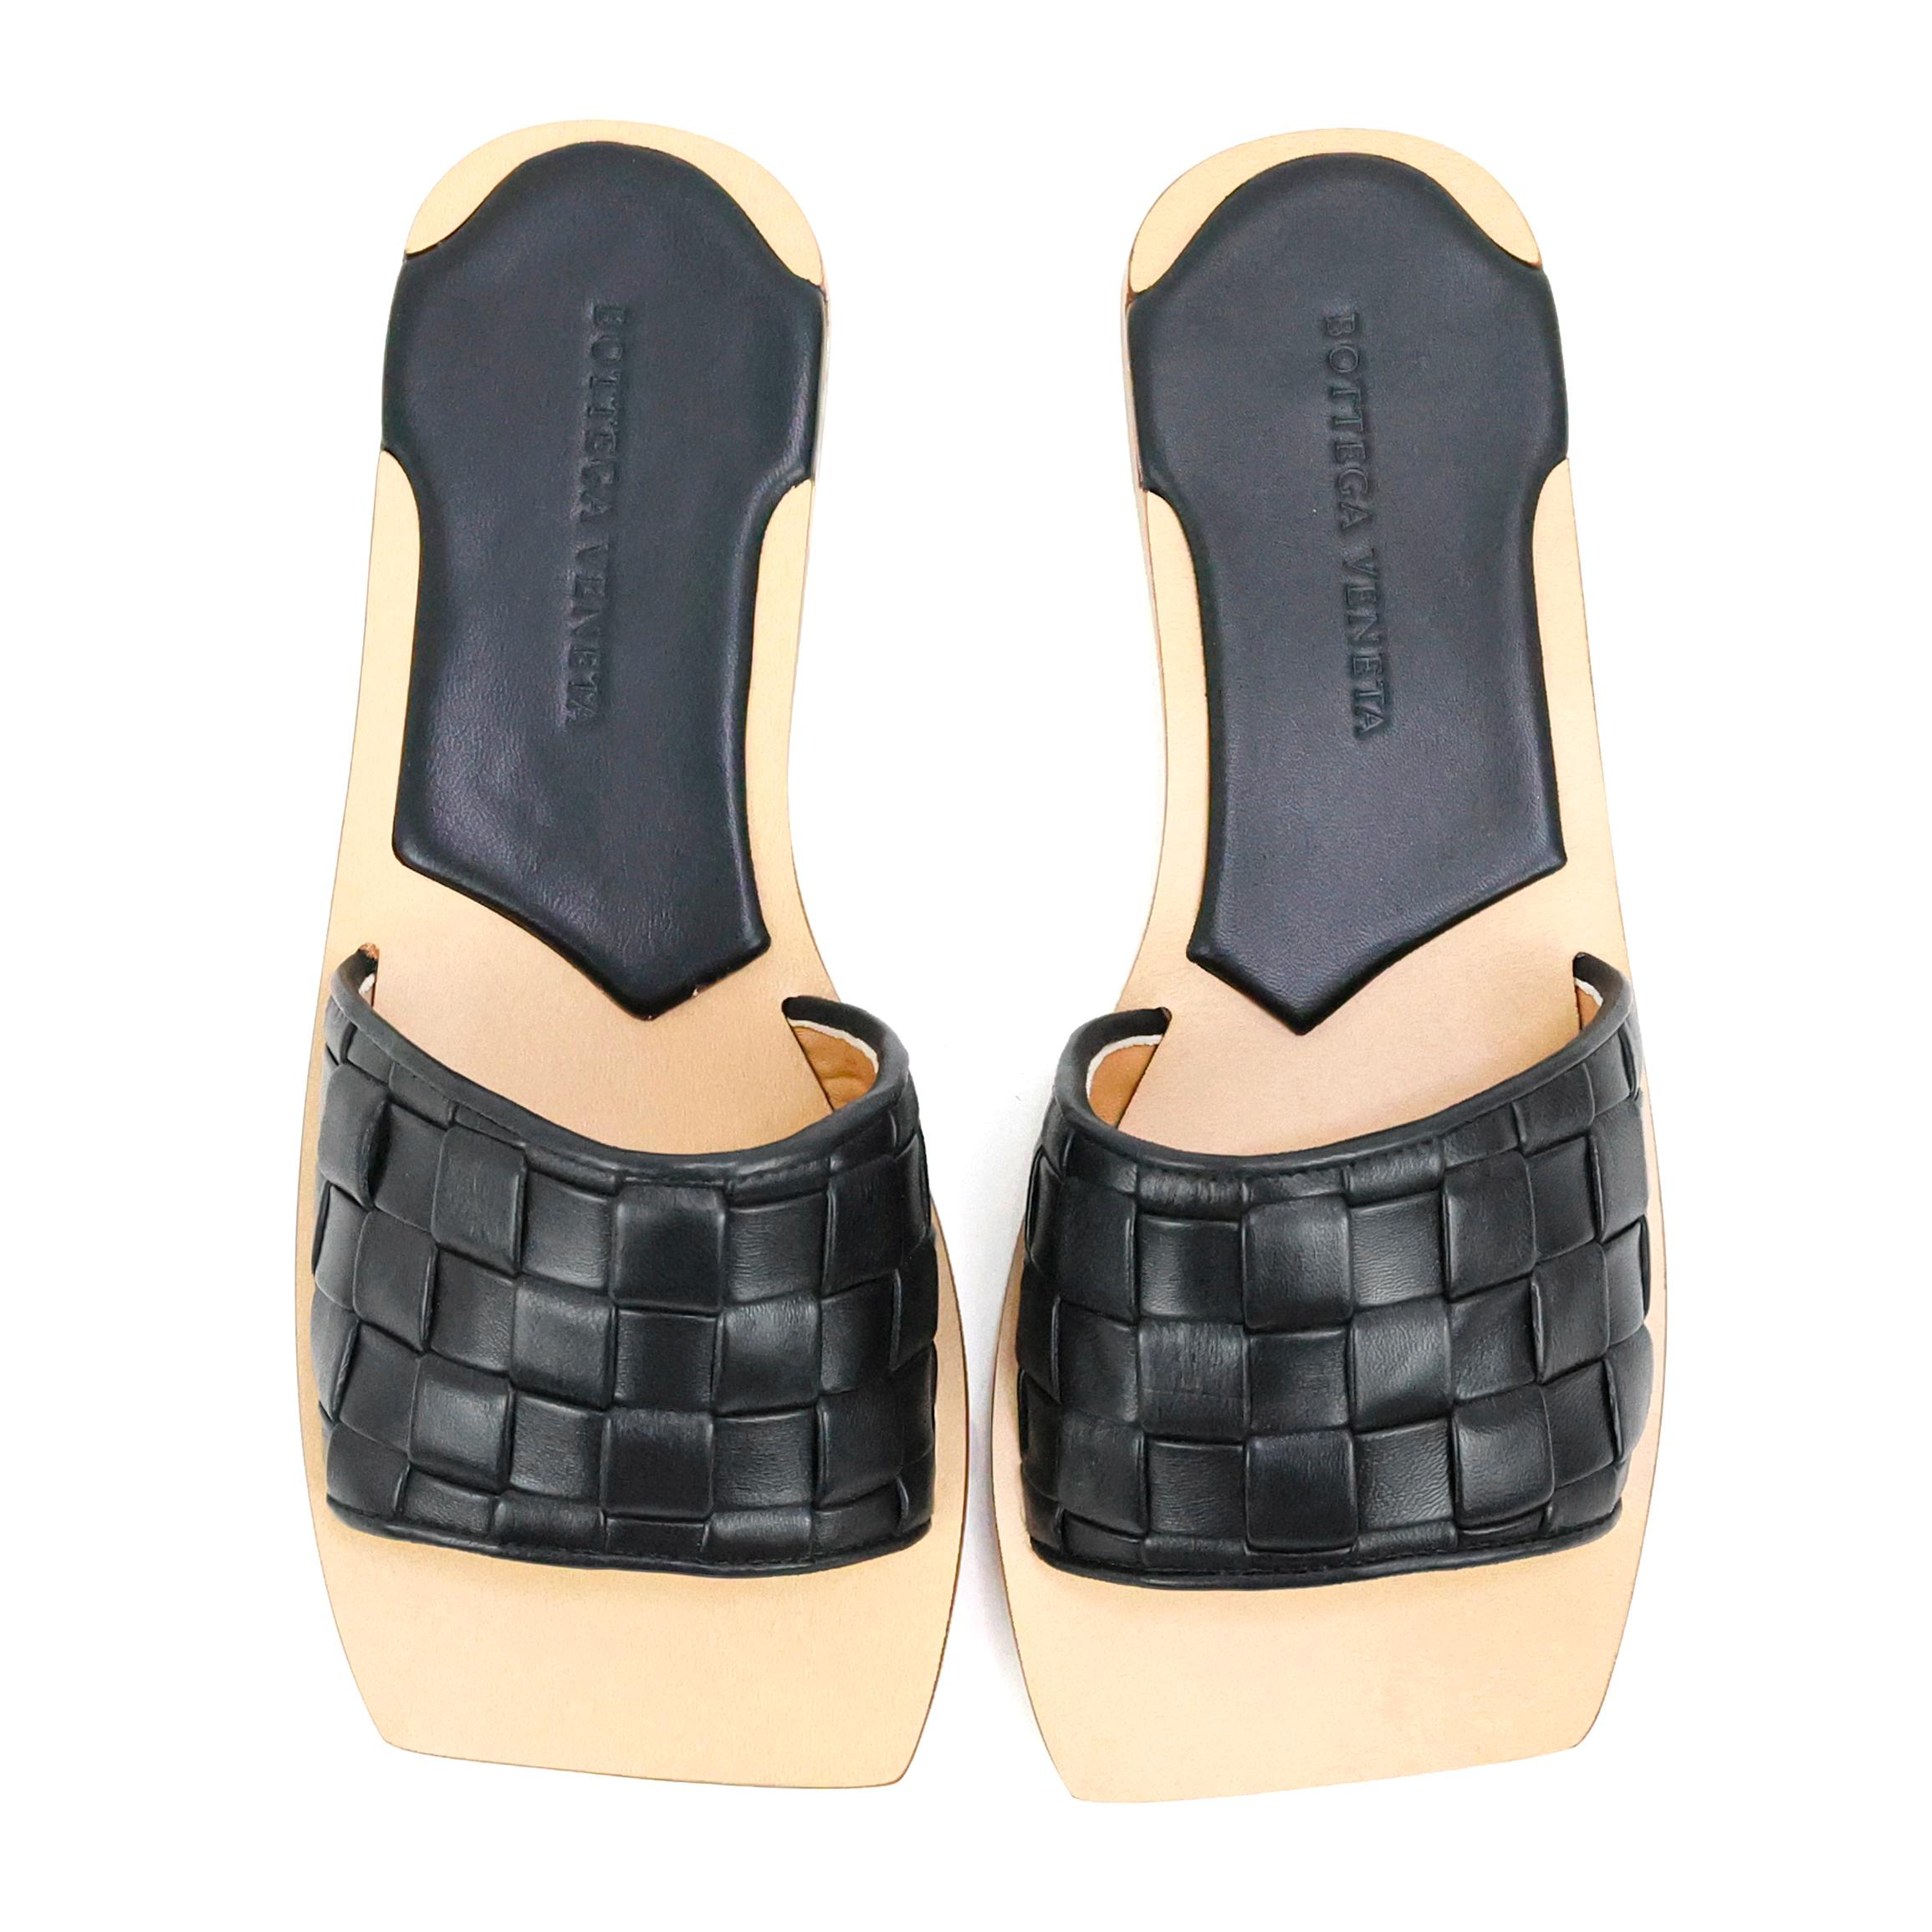 Bottega Veneta sandals in weaved nappa leather color black. Size 35EU

Condition:
New.

Packing/accessories:
Box, dustbag, card.